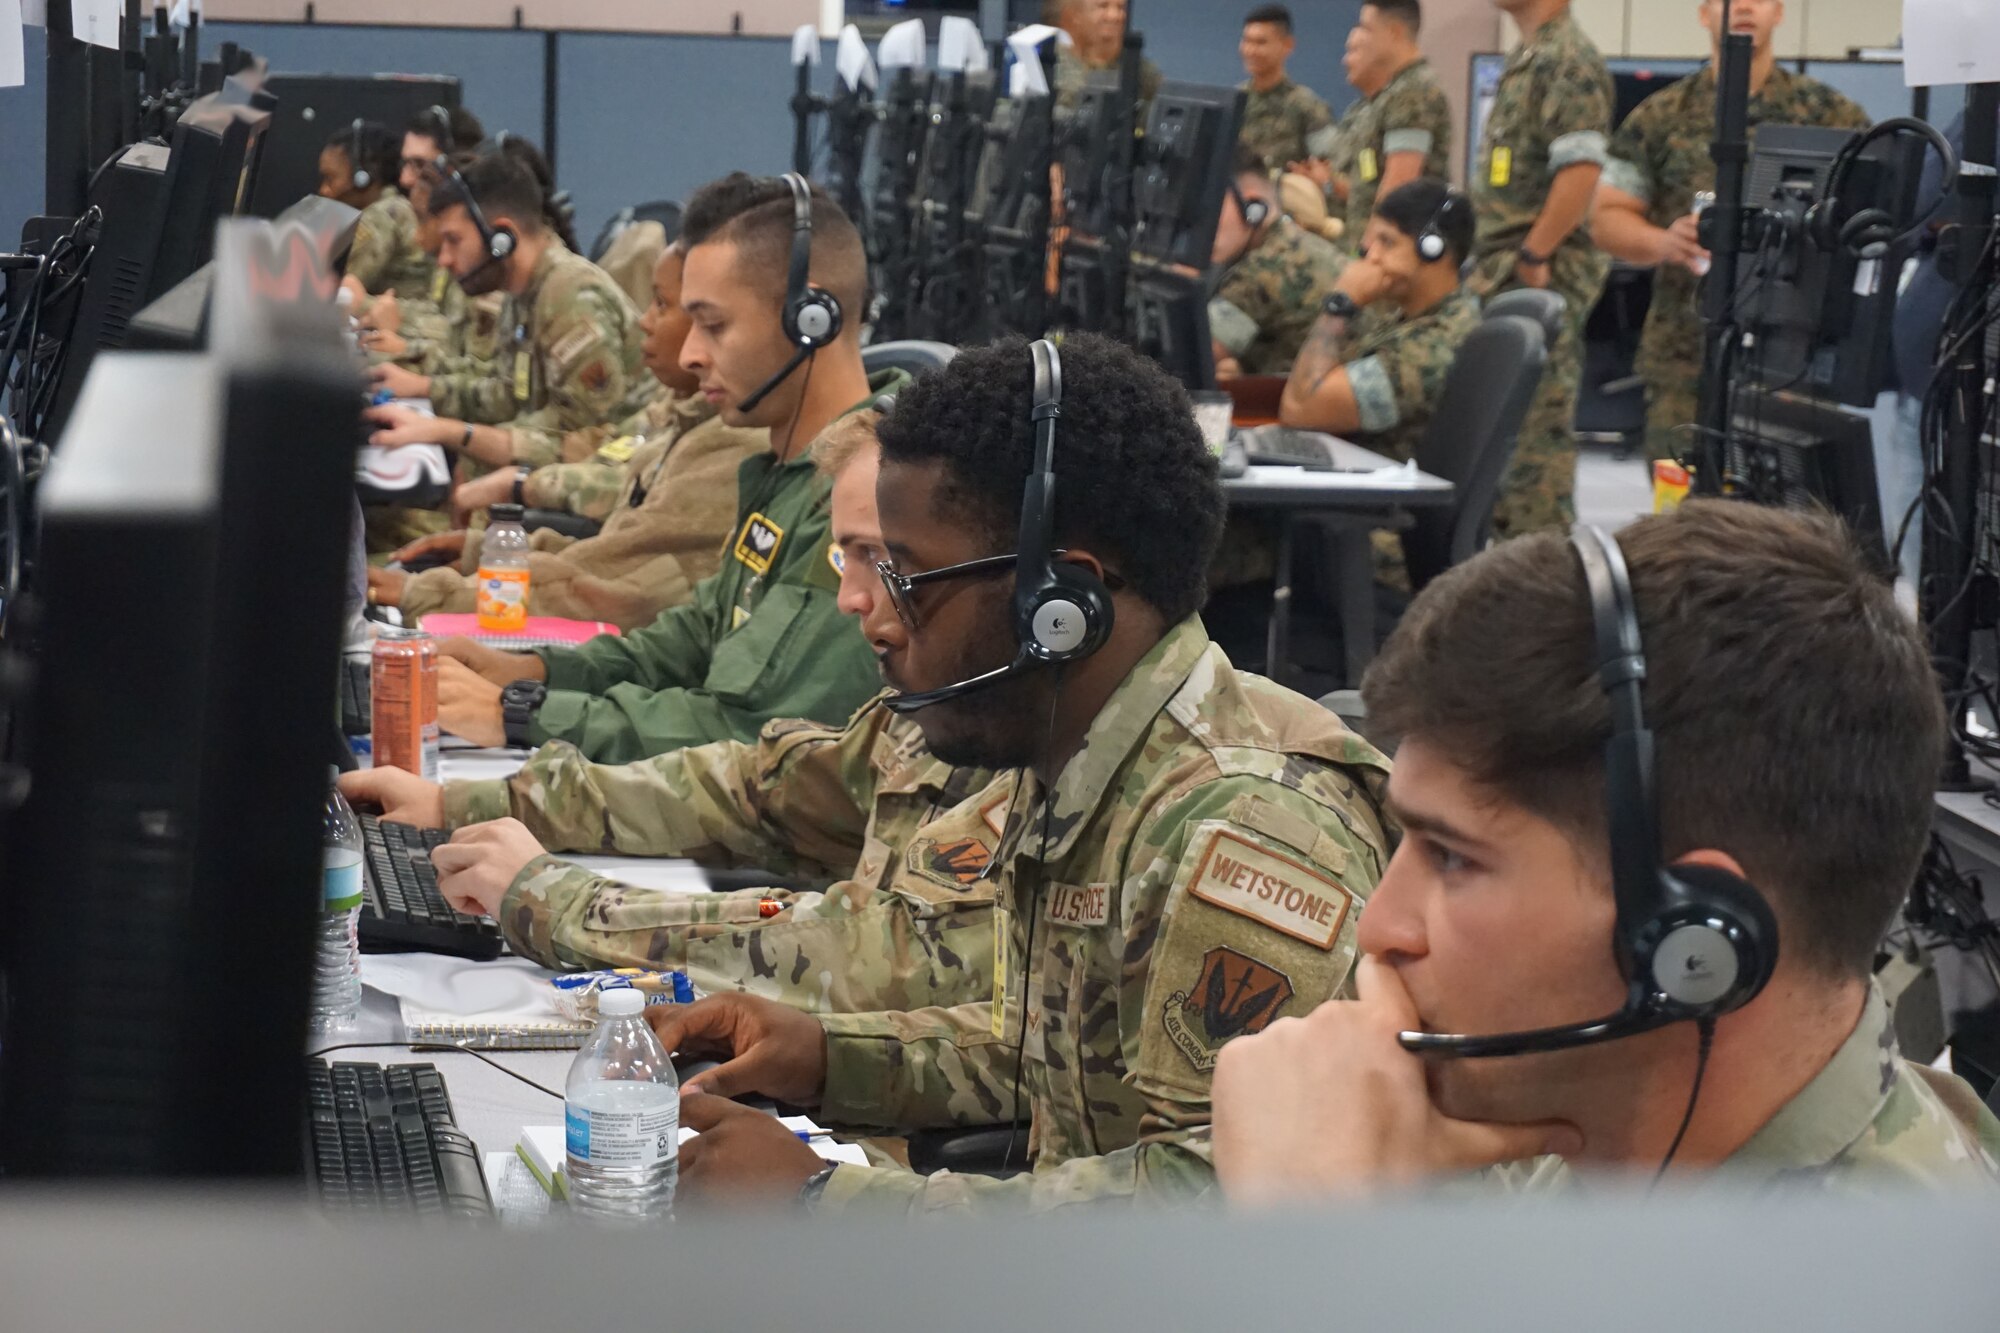 photo of US Military members working at computers